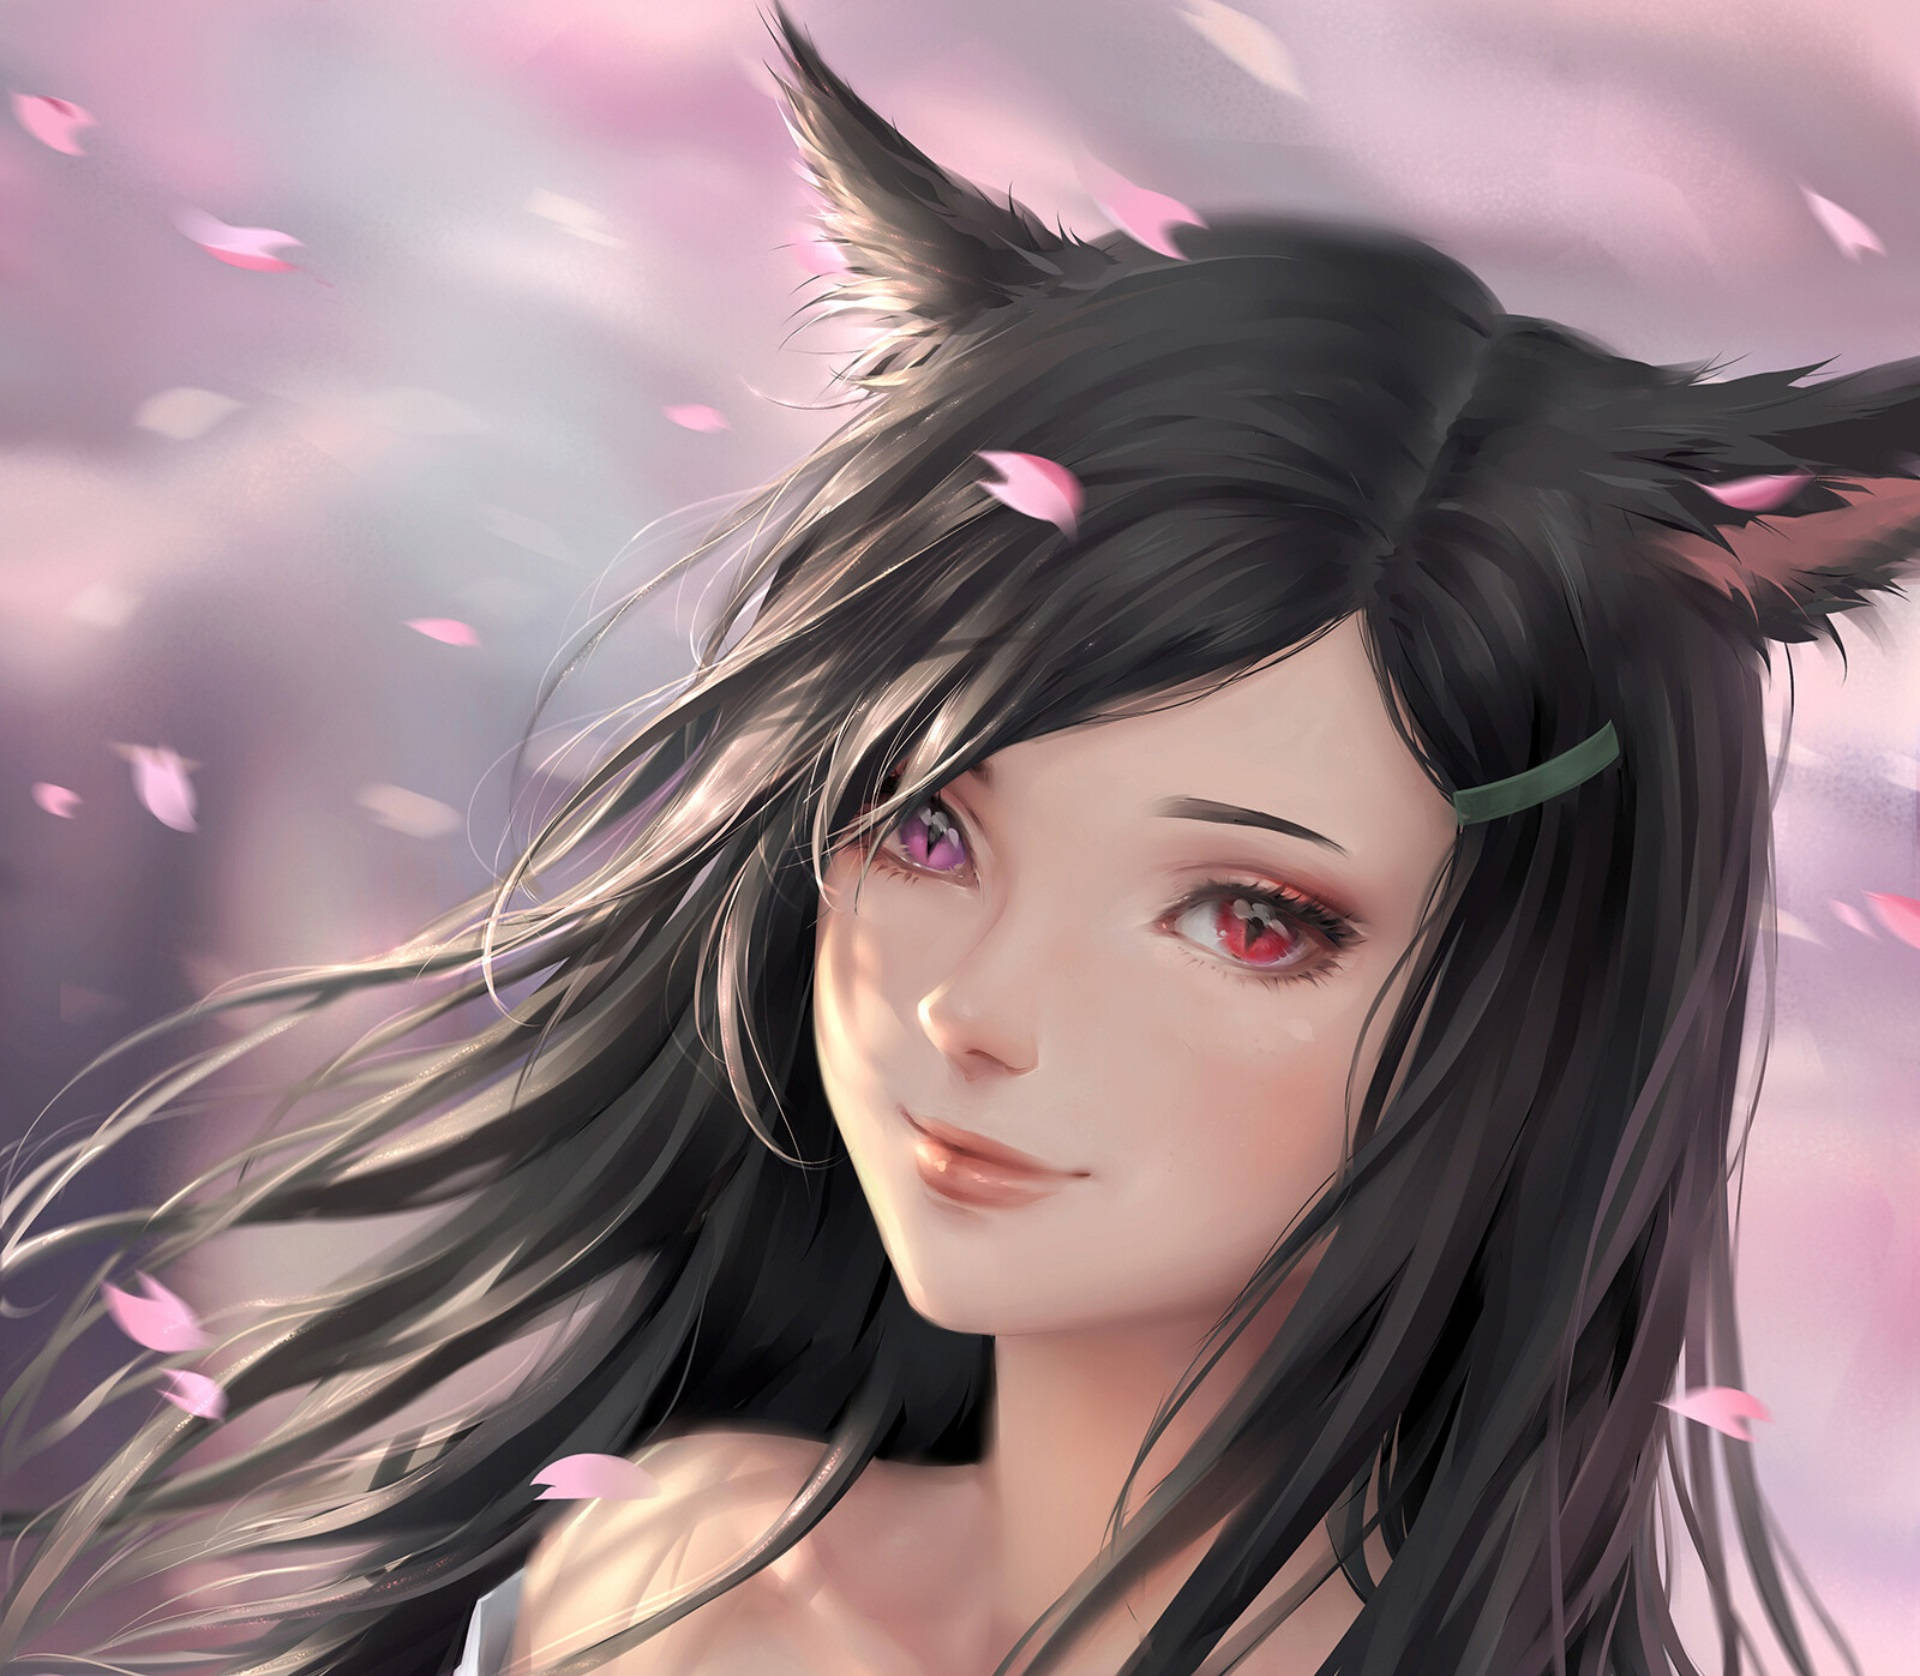 The Exotic Female Miqo'te from Final Fantasy 14 Wallpaper